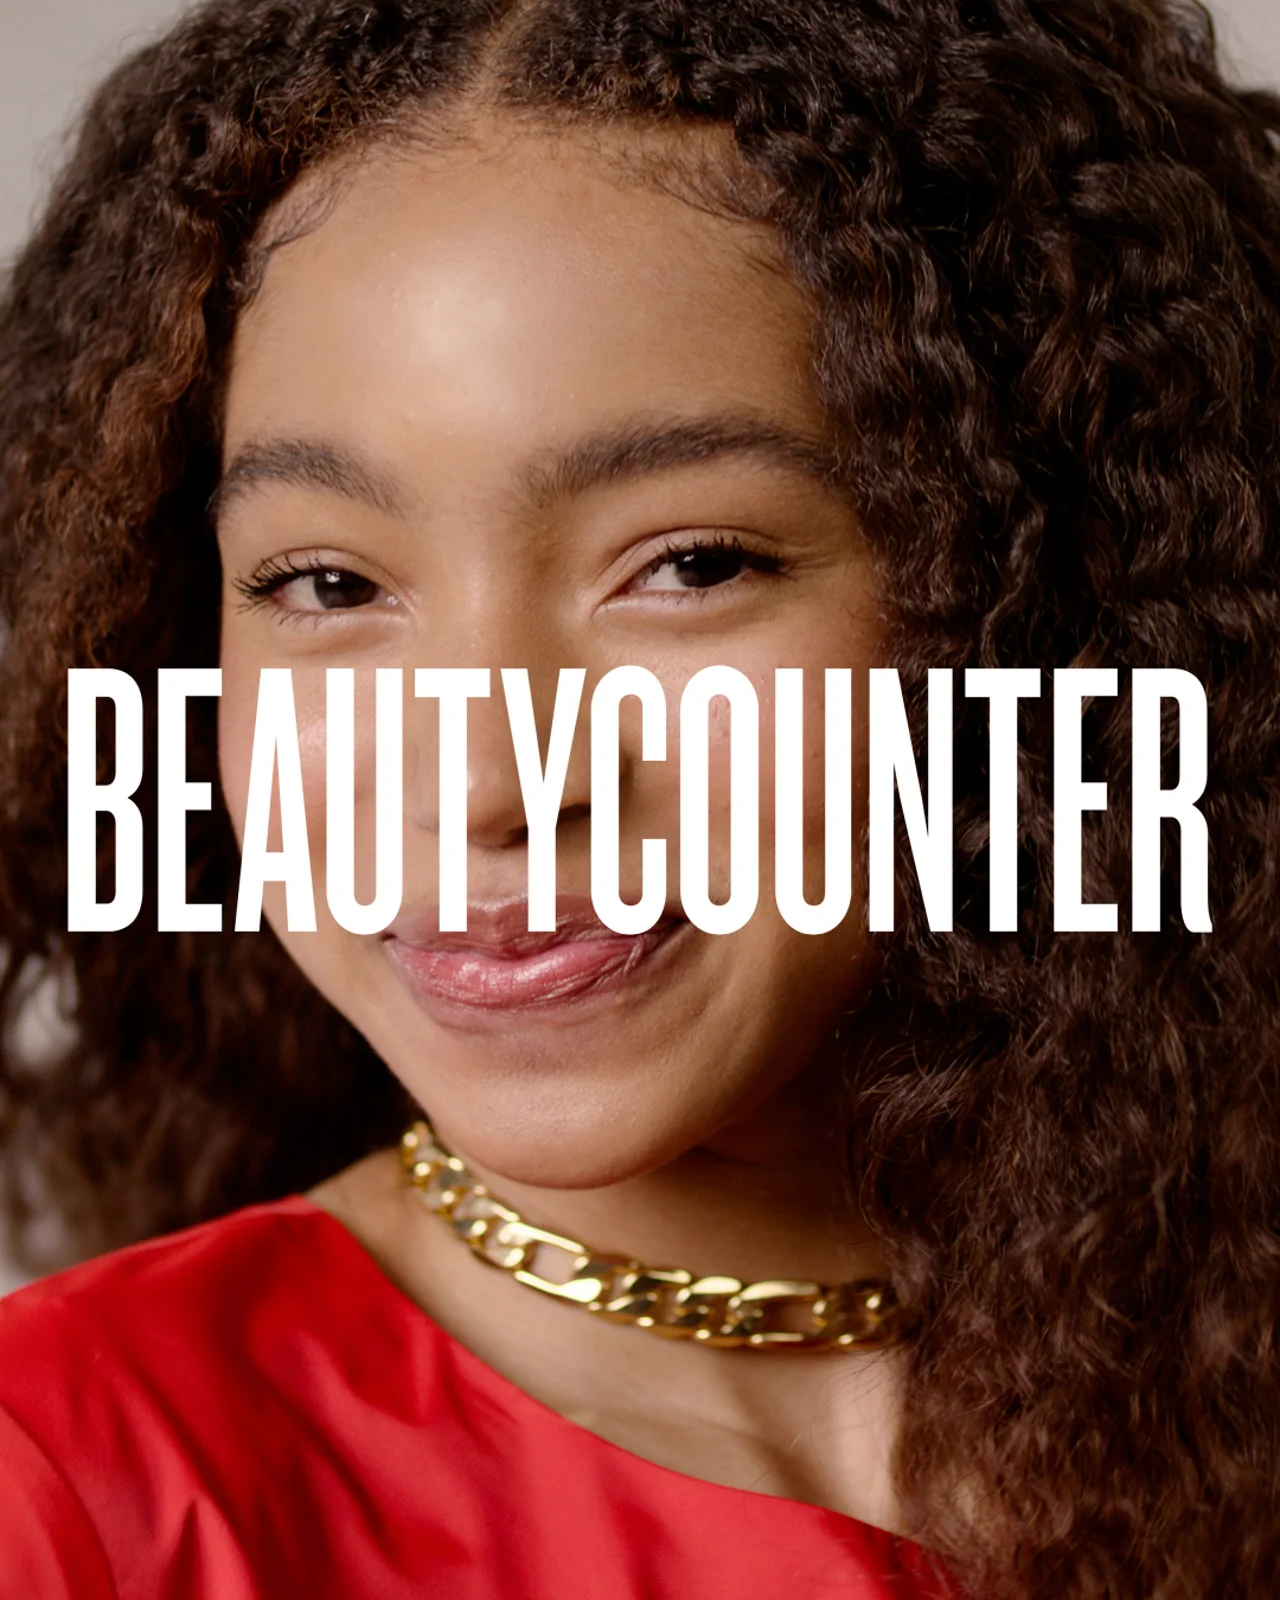 Beautycounter All In One Mascara "BTS Tips & Tricks" :10